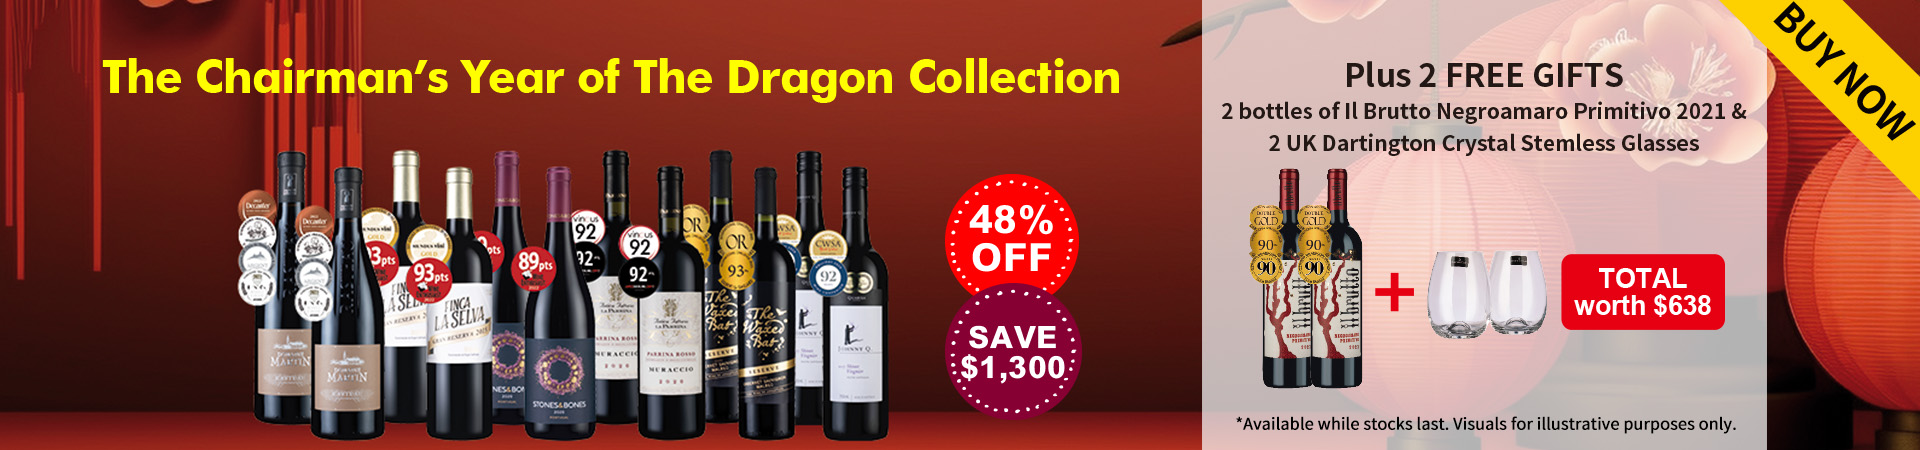 The Chairman’s Year of The Dragon Collection